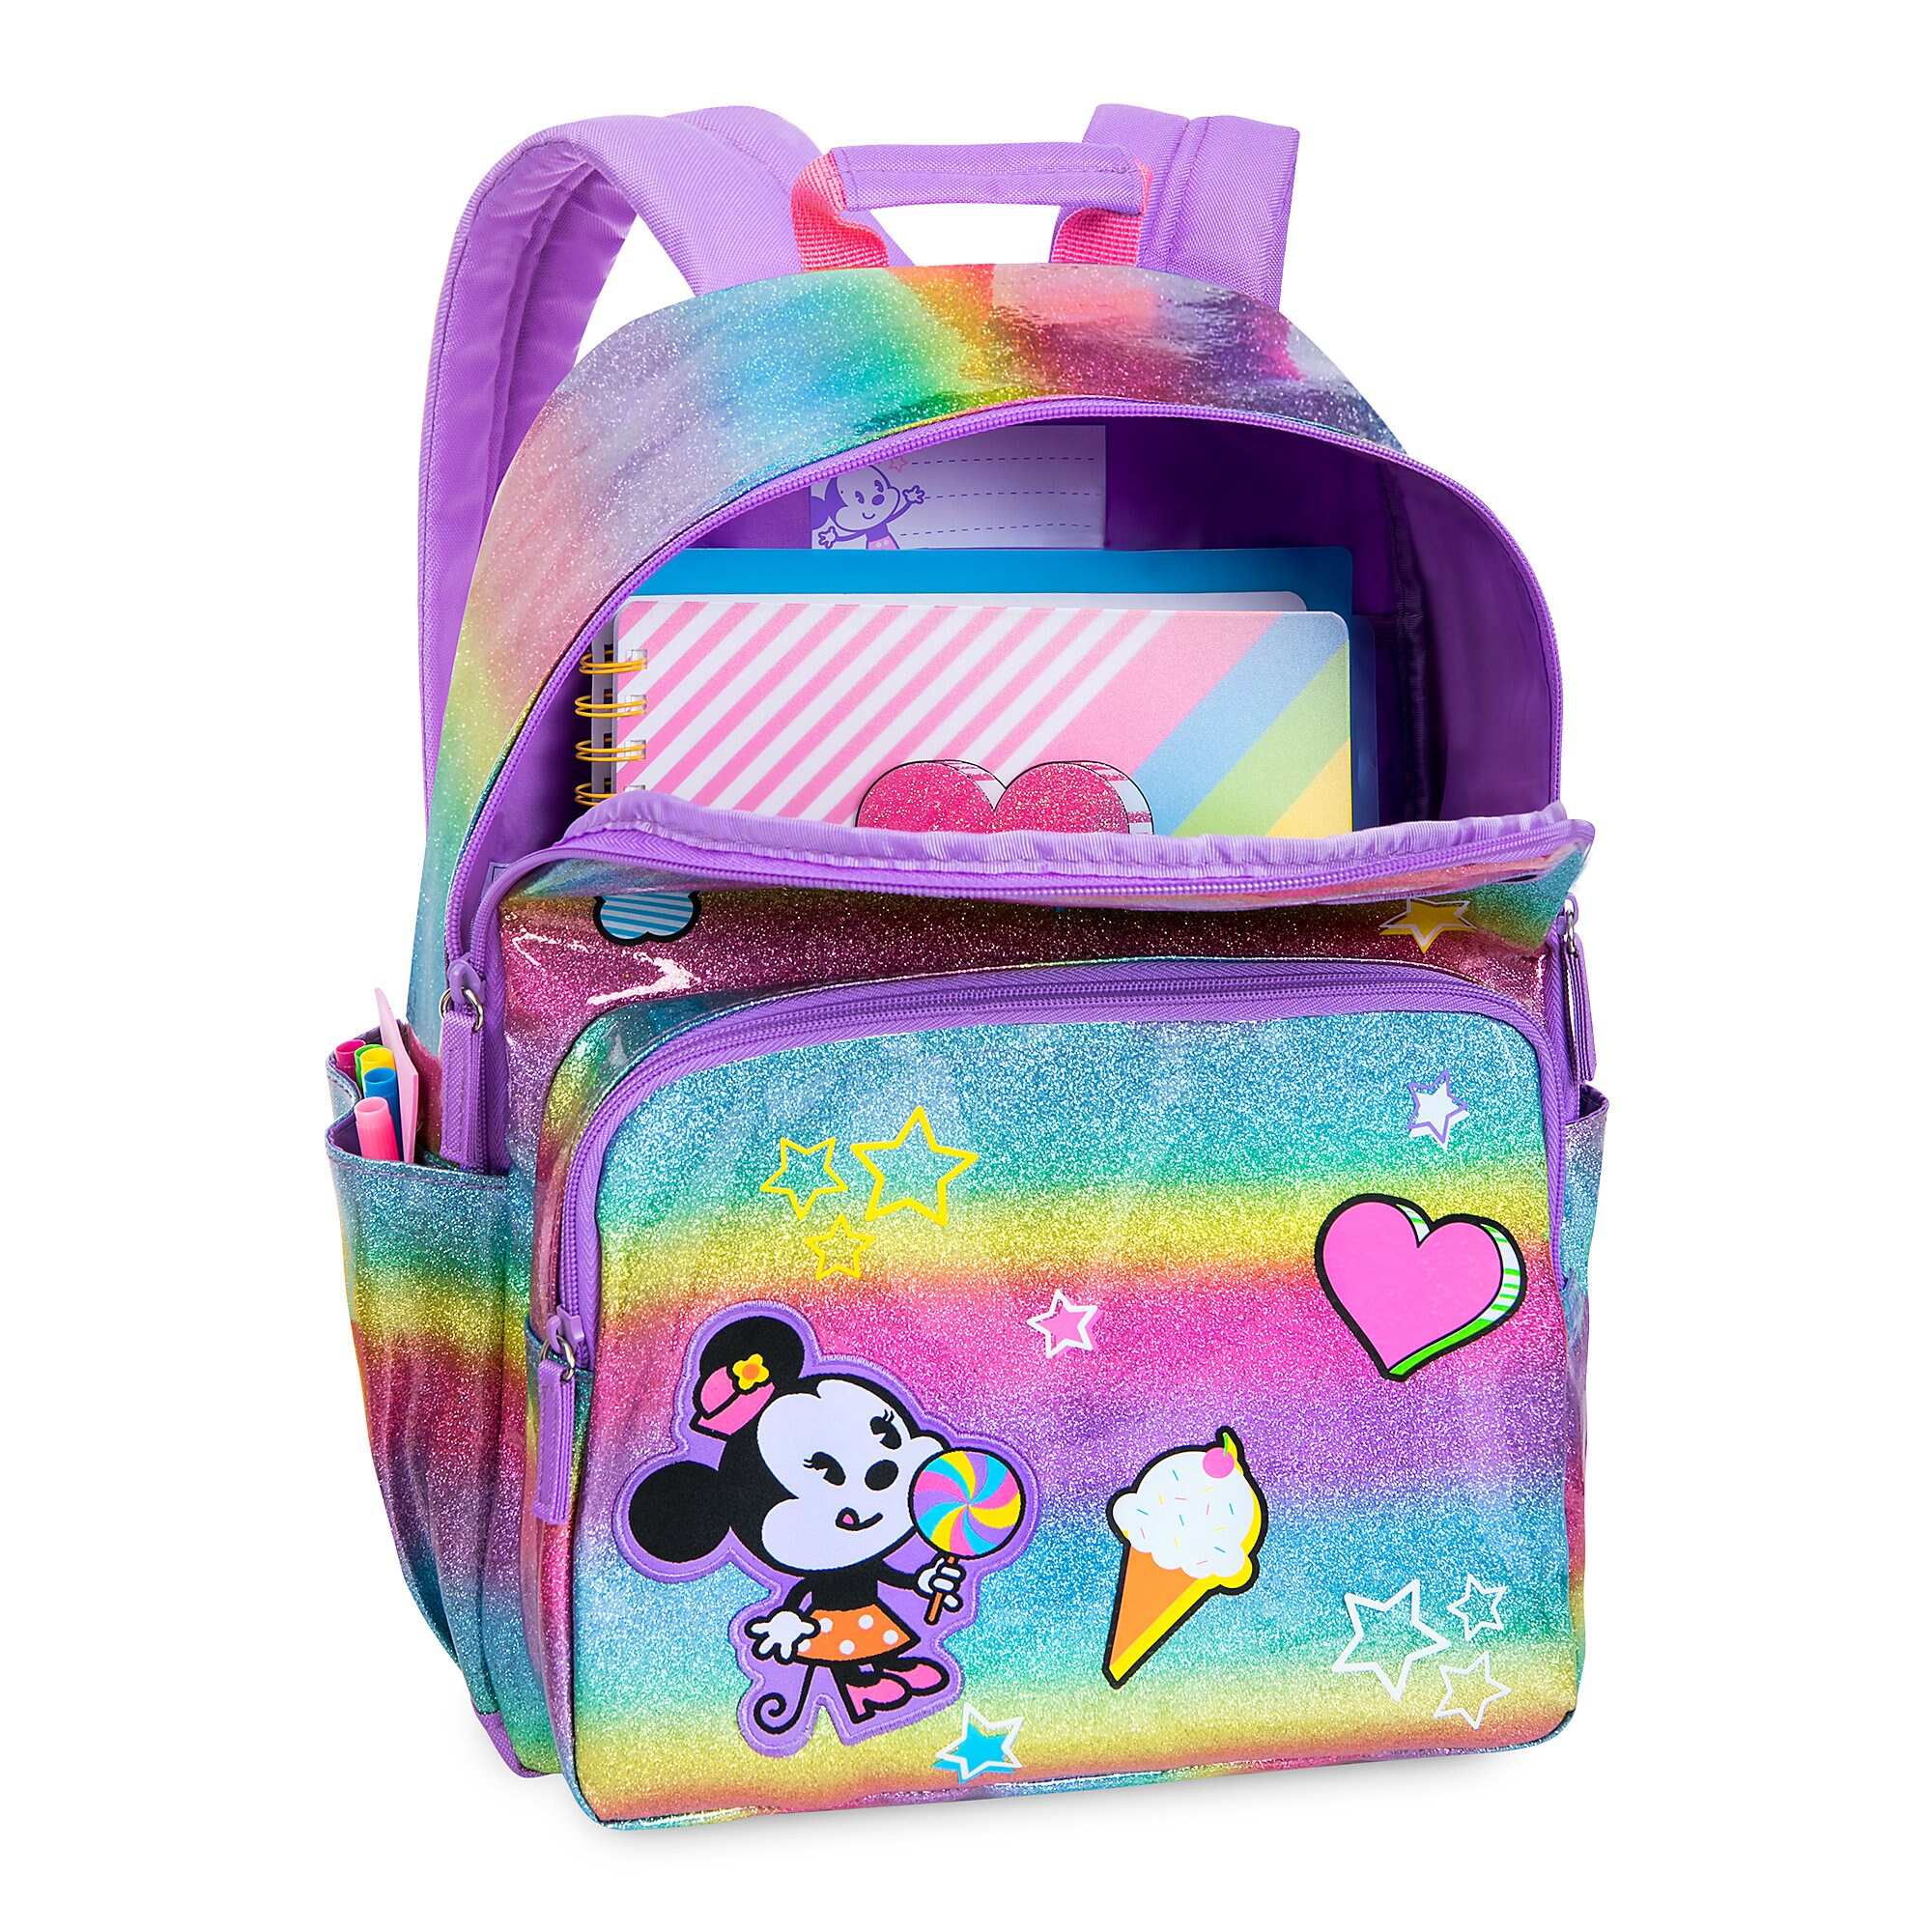 Mickey and Minnie Mouse Backpack - Personalized